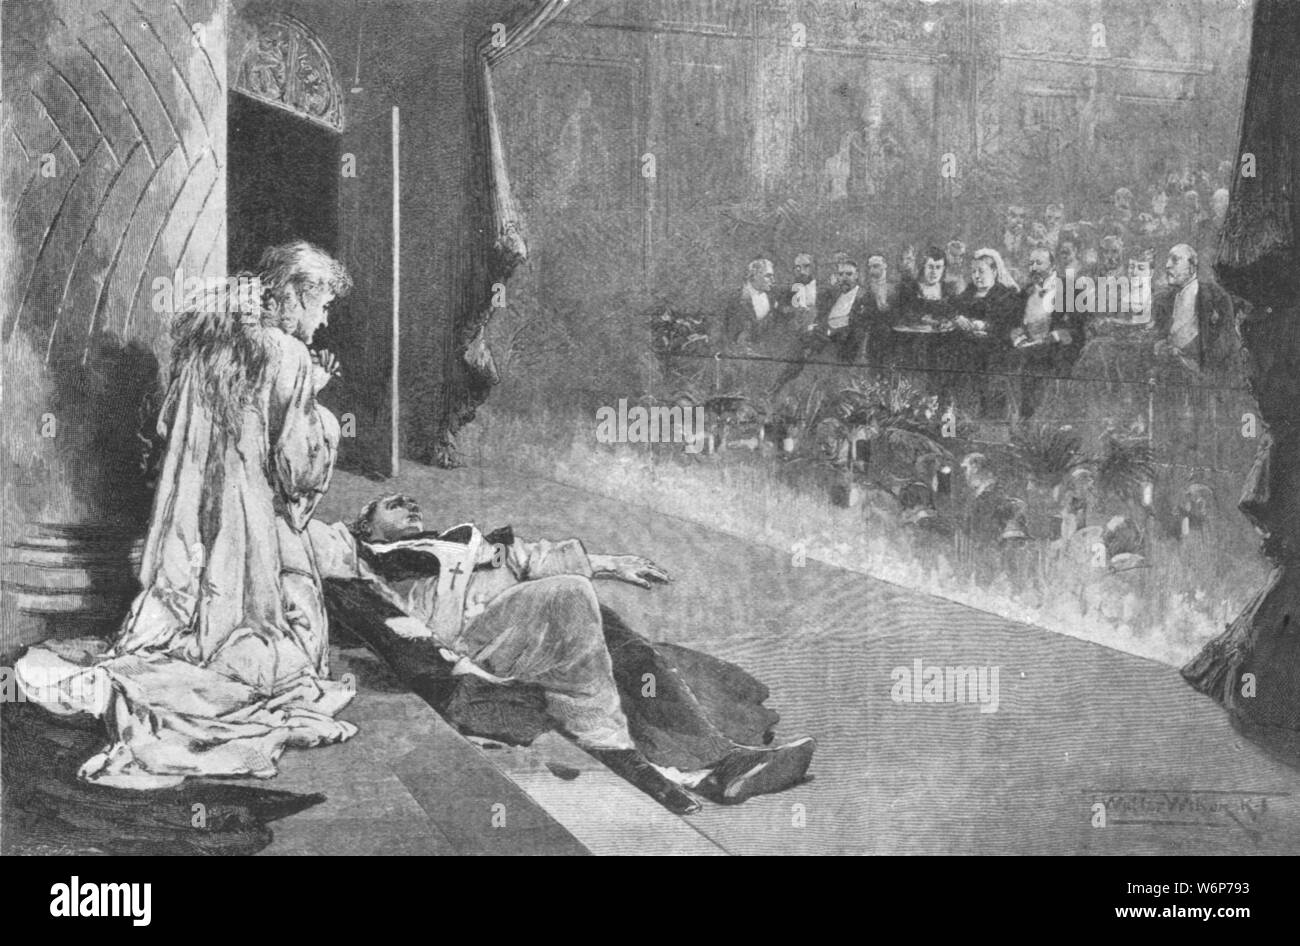 'Henry Irving and Ellen Terry in Tennyson's &quot;Becket&quot; at Windsor Castle', 1893, (1901). Actors Henry Irving (as Thomas Becket) and Ellen Terry (as Rosamund) performed in &quot;Becket&quot; by Alfred Lord Tennyson, in front of Queen Victoria on 18 March 1893. From &quot;The Illustrated London News Record of the Glorious Reign of Queen Victoria 1837-1901: The Life and Accession of King Edward VII. and the Life of Queen Alexandra&quot;. [London, 1901] Stock Photo